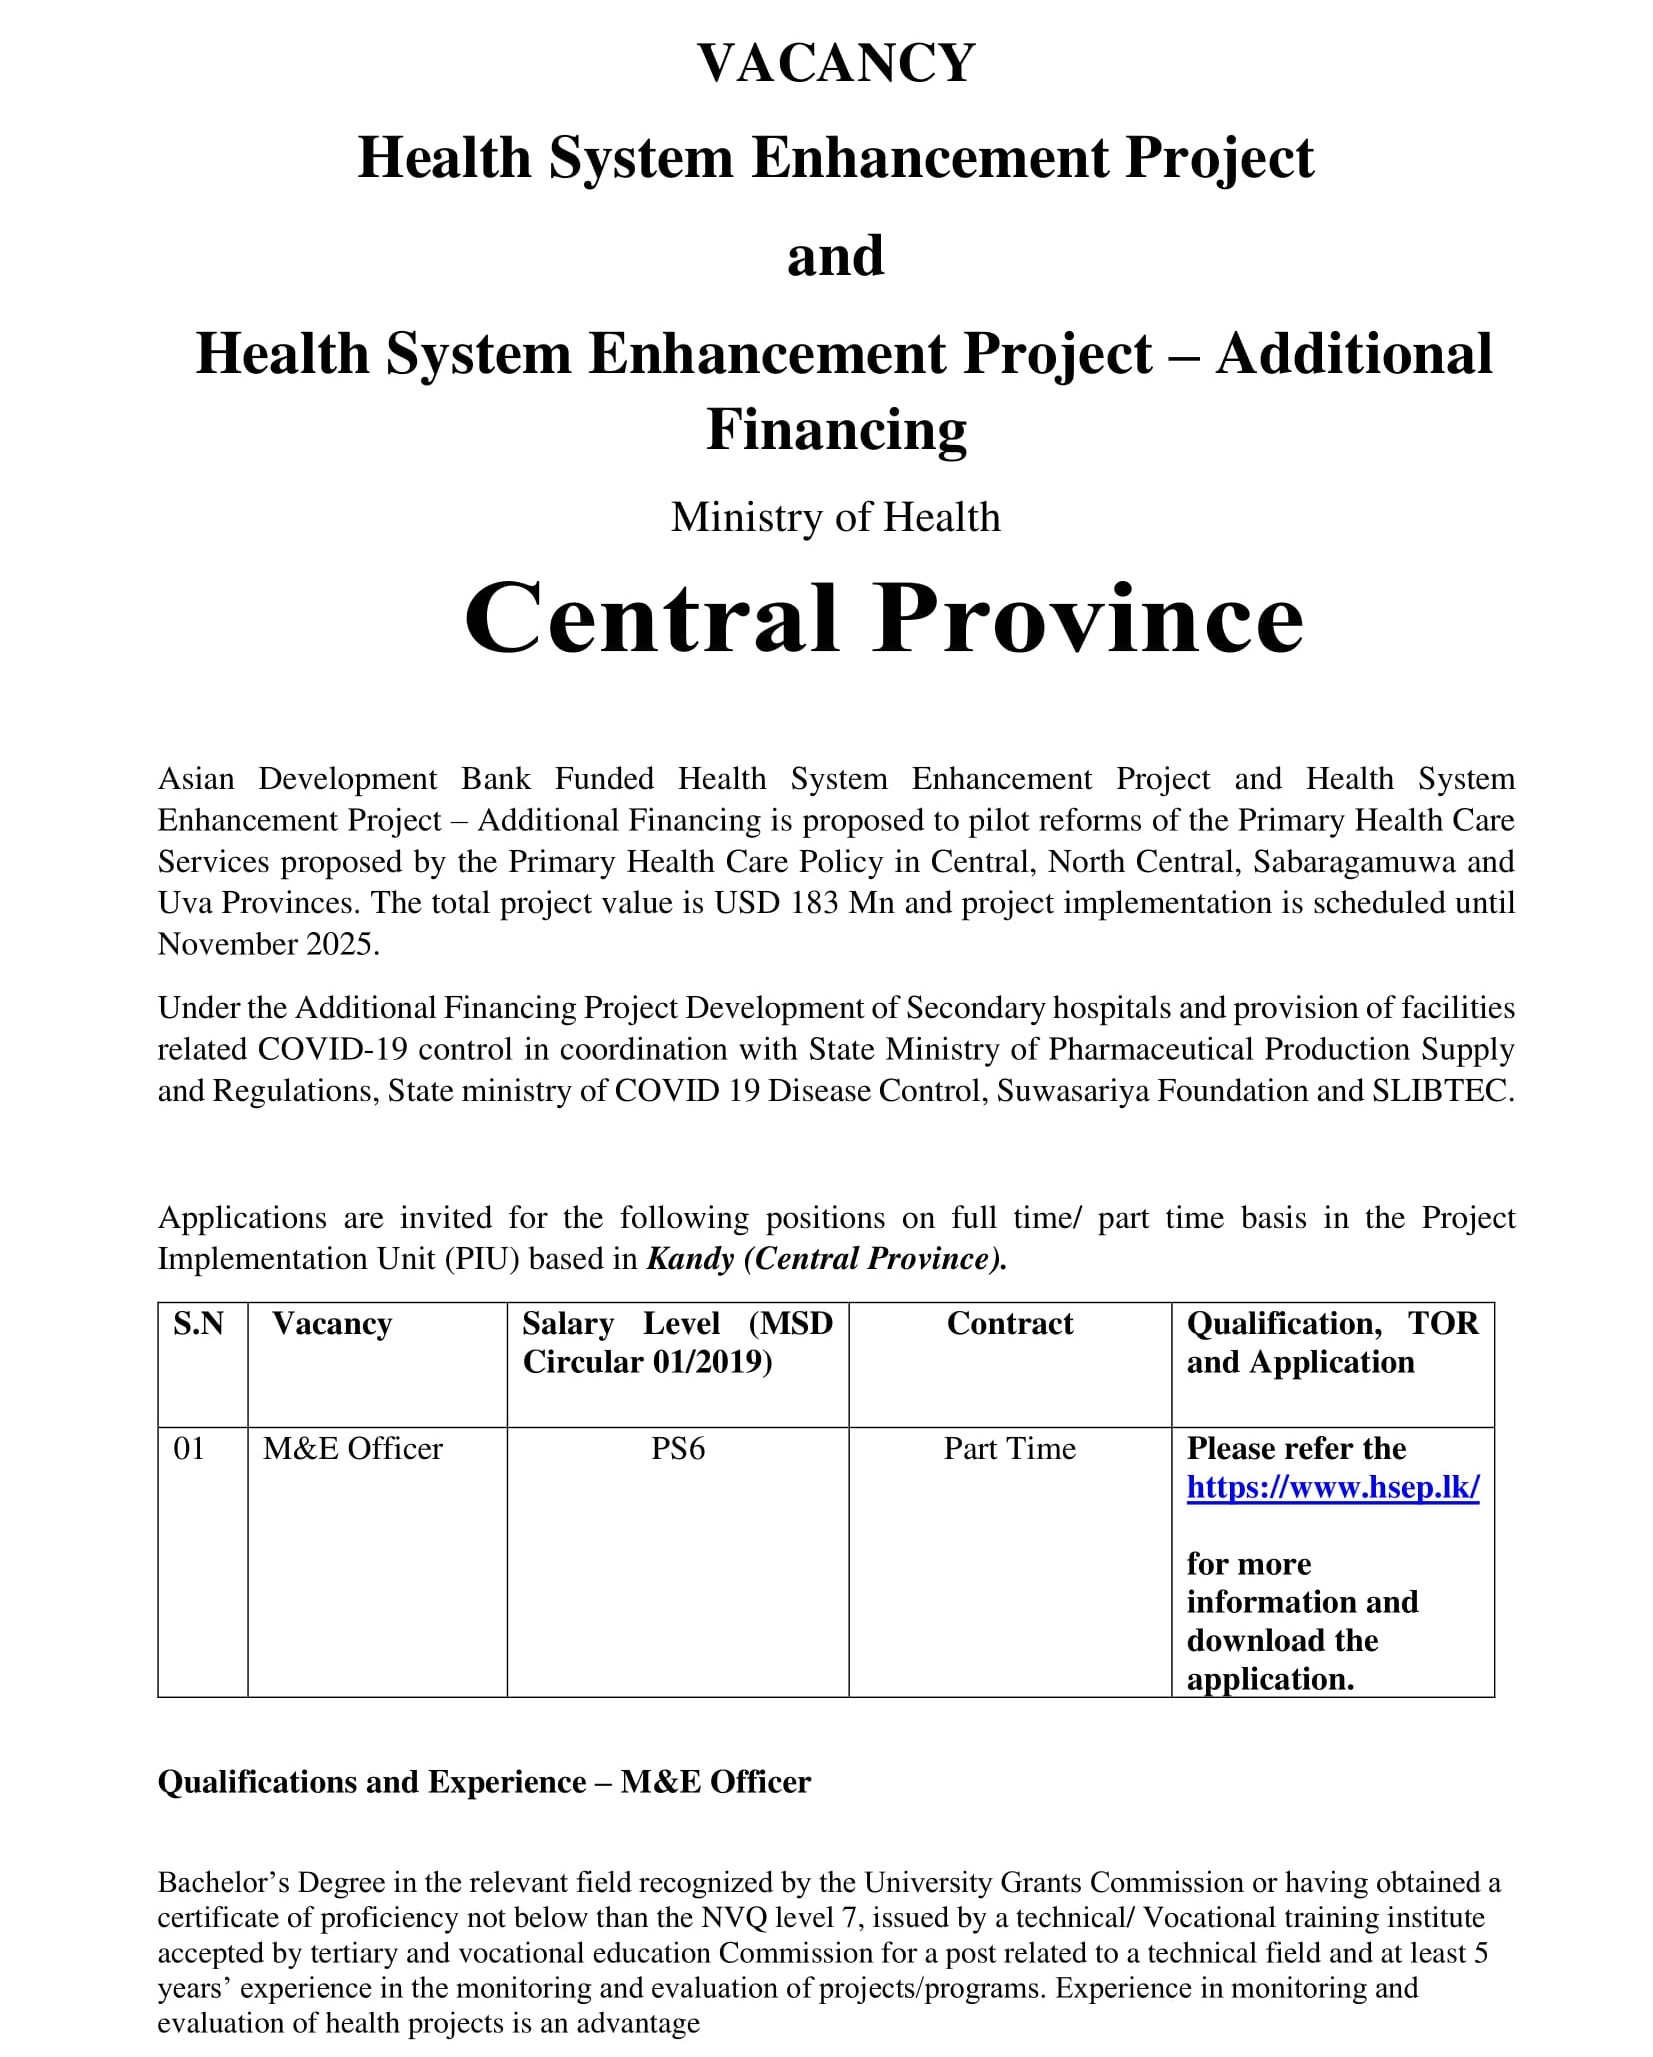 Monitoring & Evaluation Officer / Project Secretary / Project Officer Vacancies in Ministry of Health - Central Province